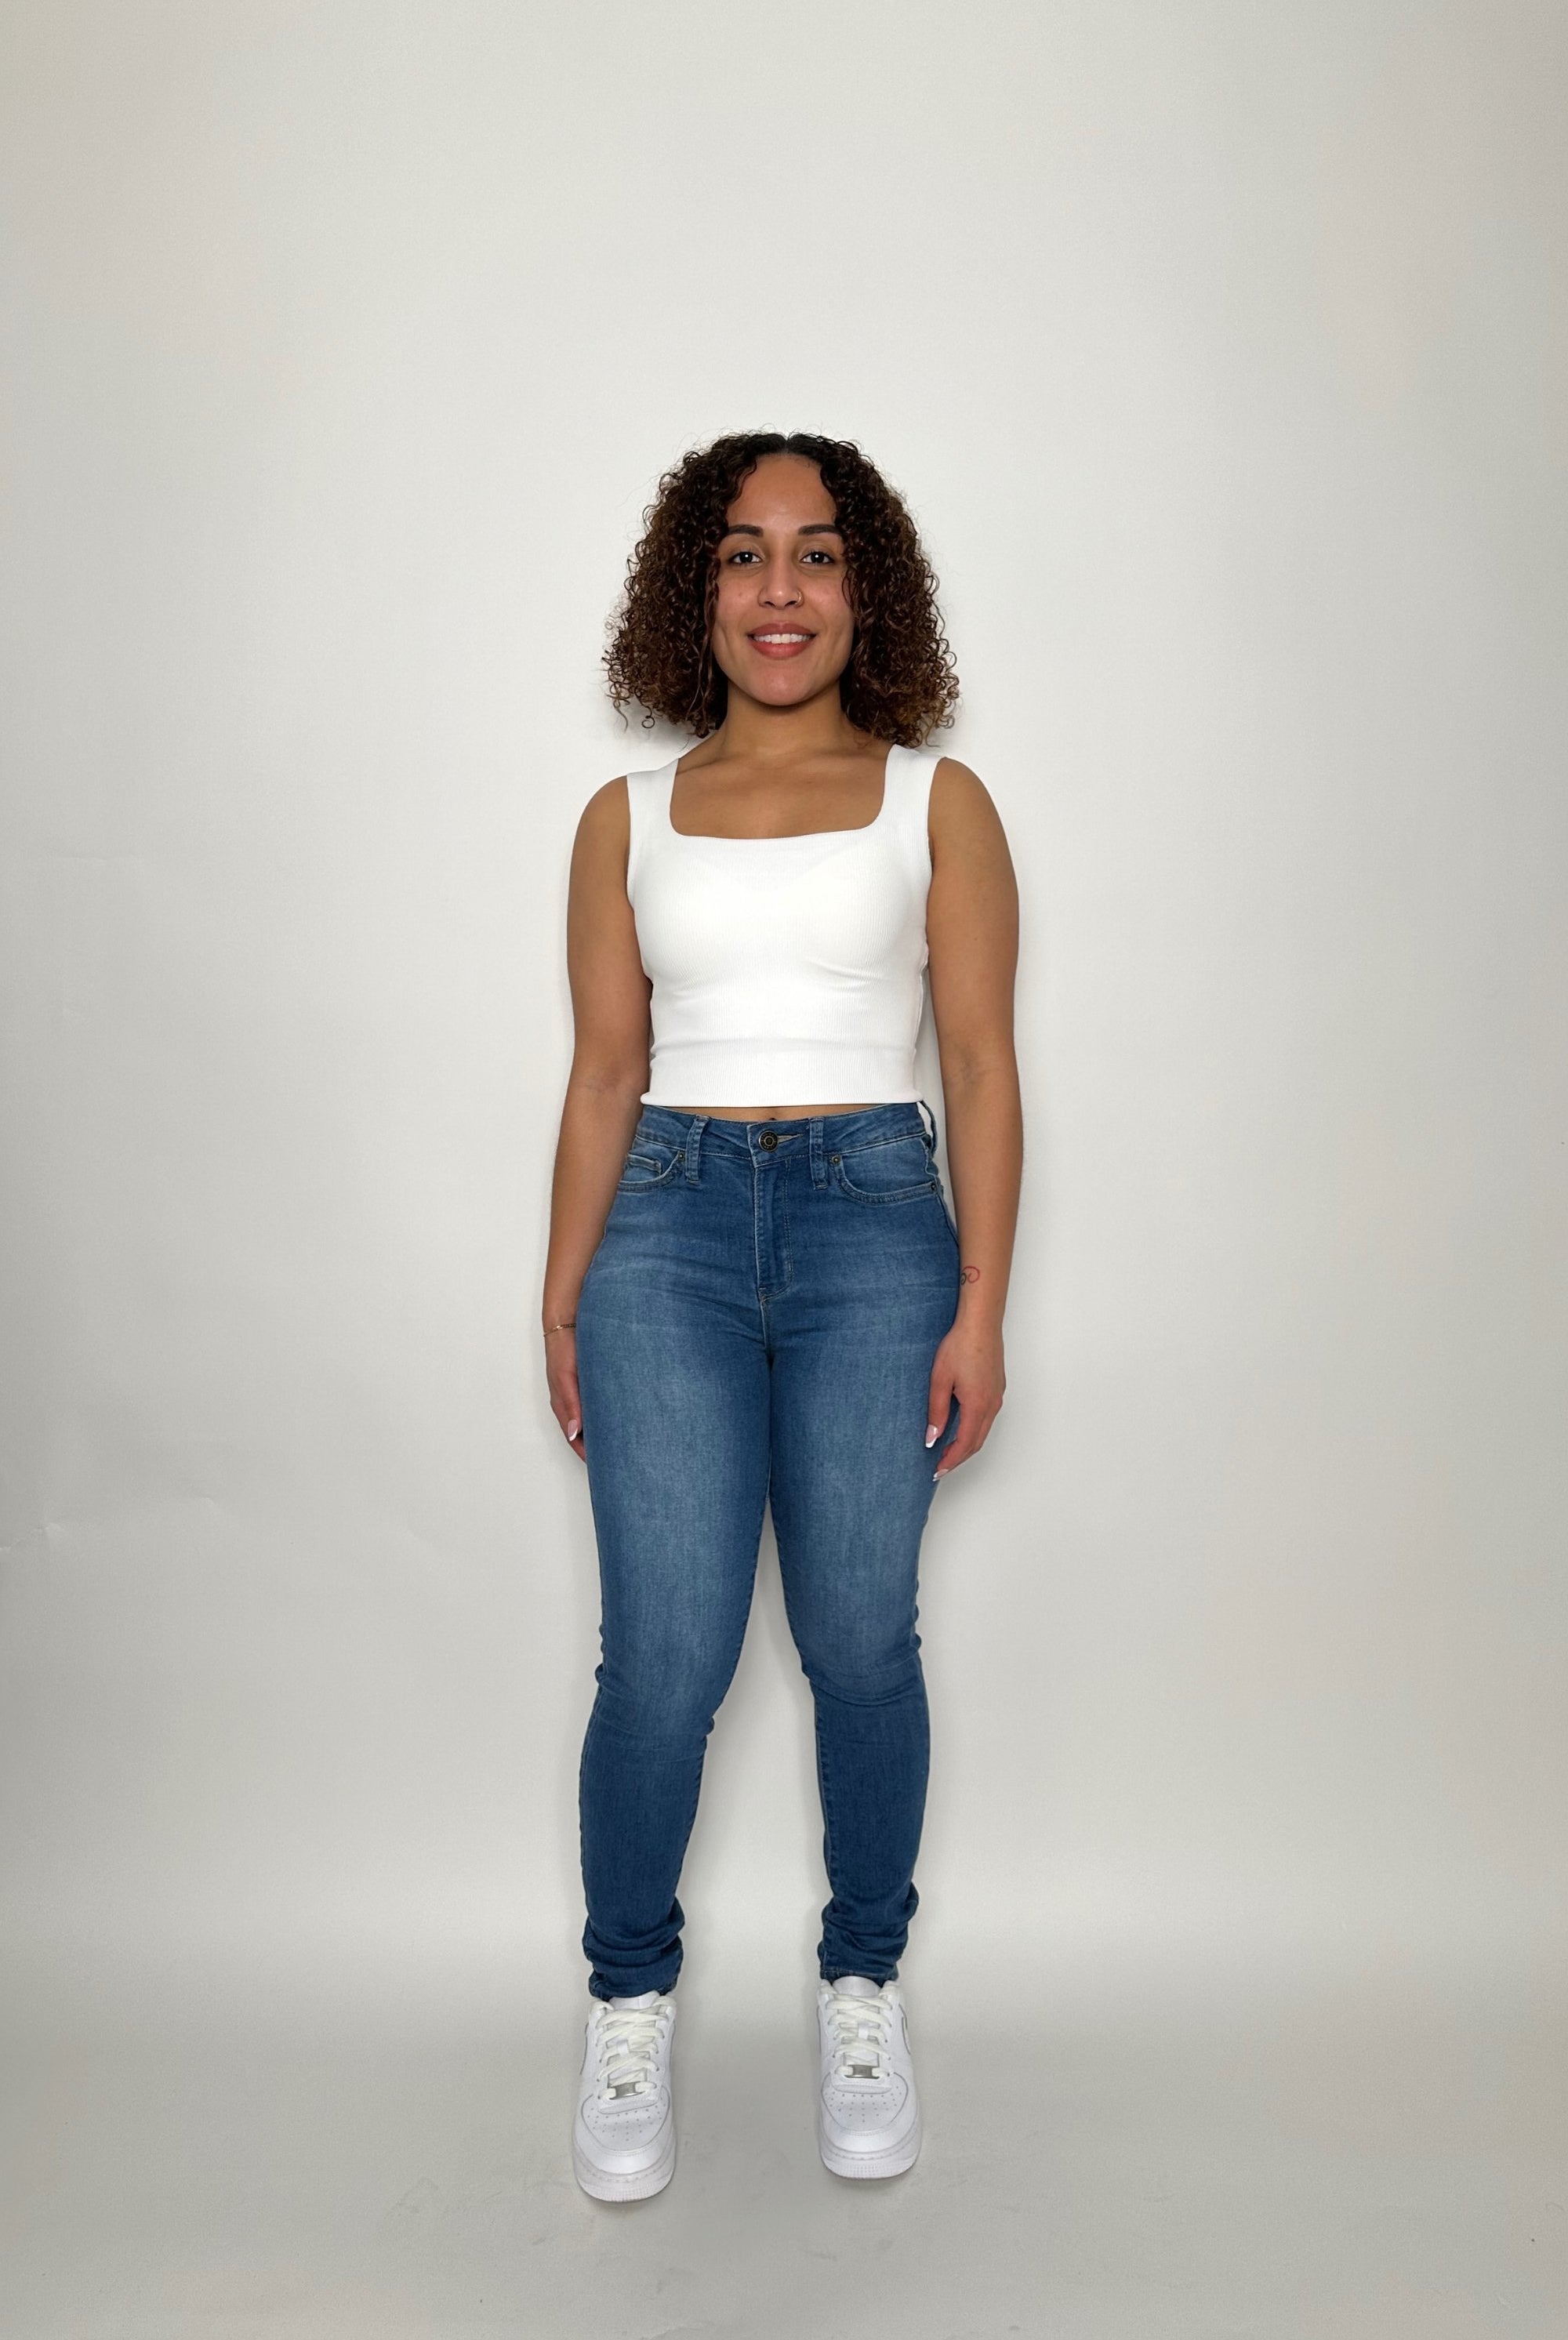 NatxCustomStyle Jeans  | Skinny Jean | High-Rise Jeans| The Classic Jean